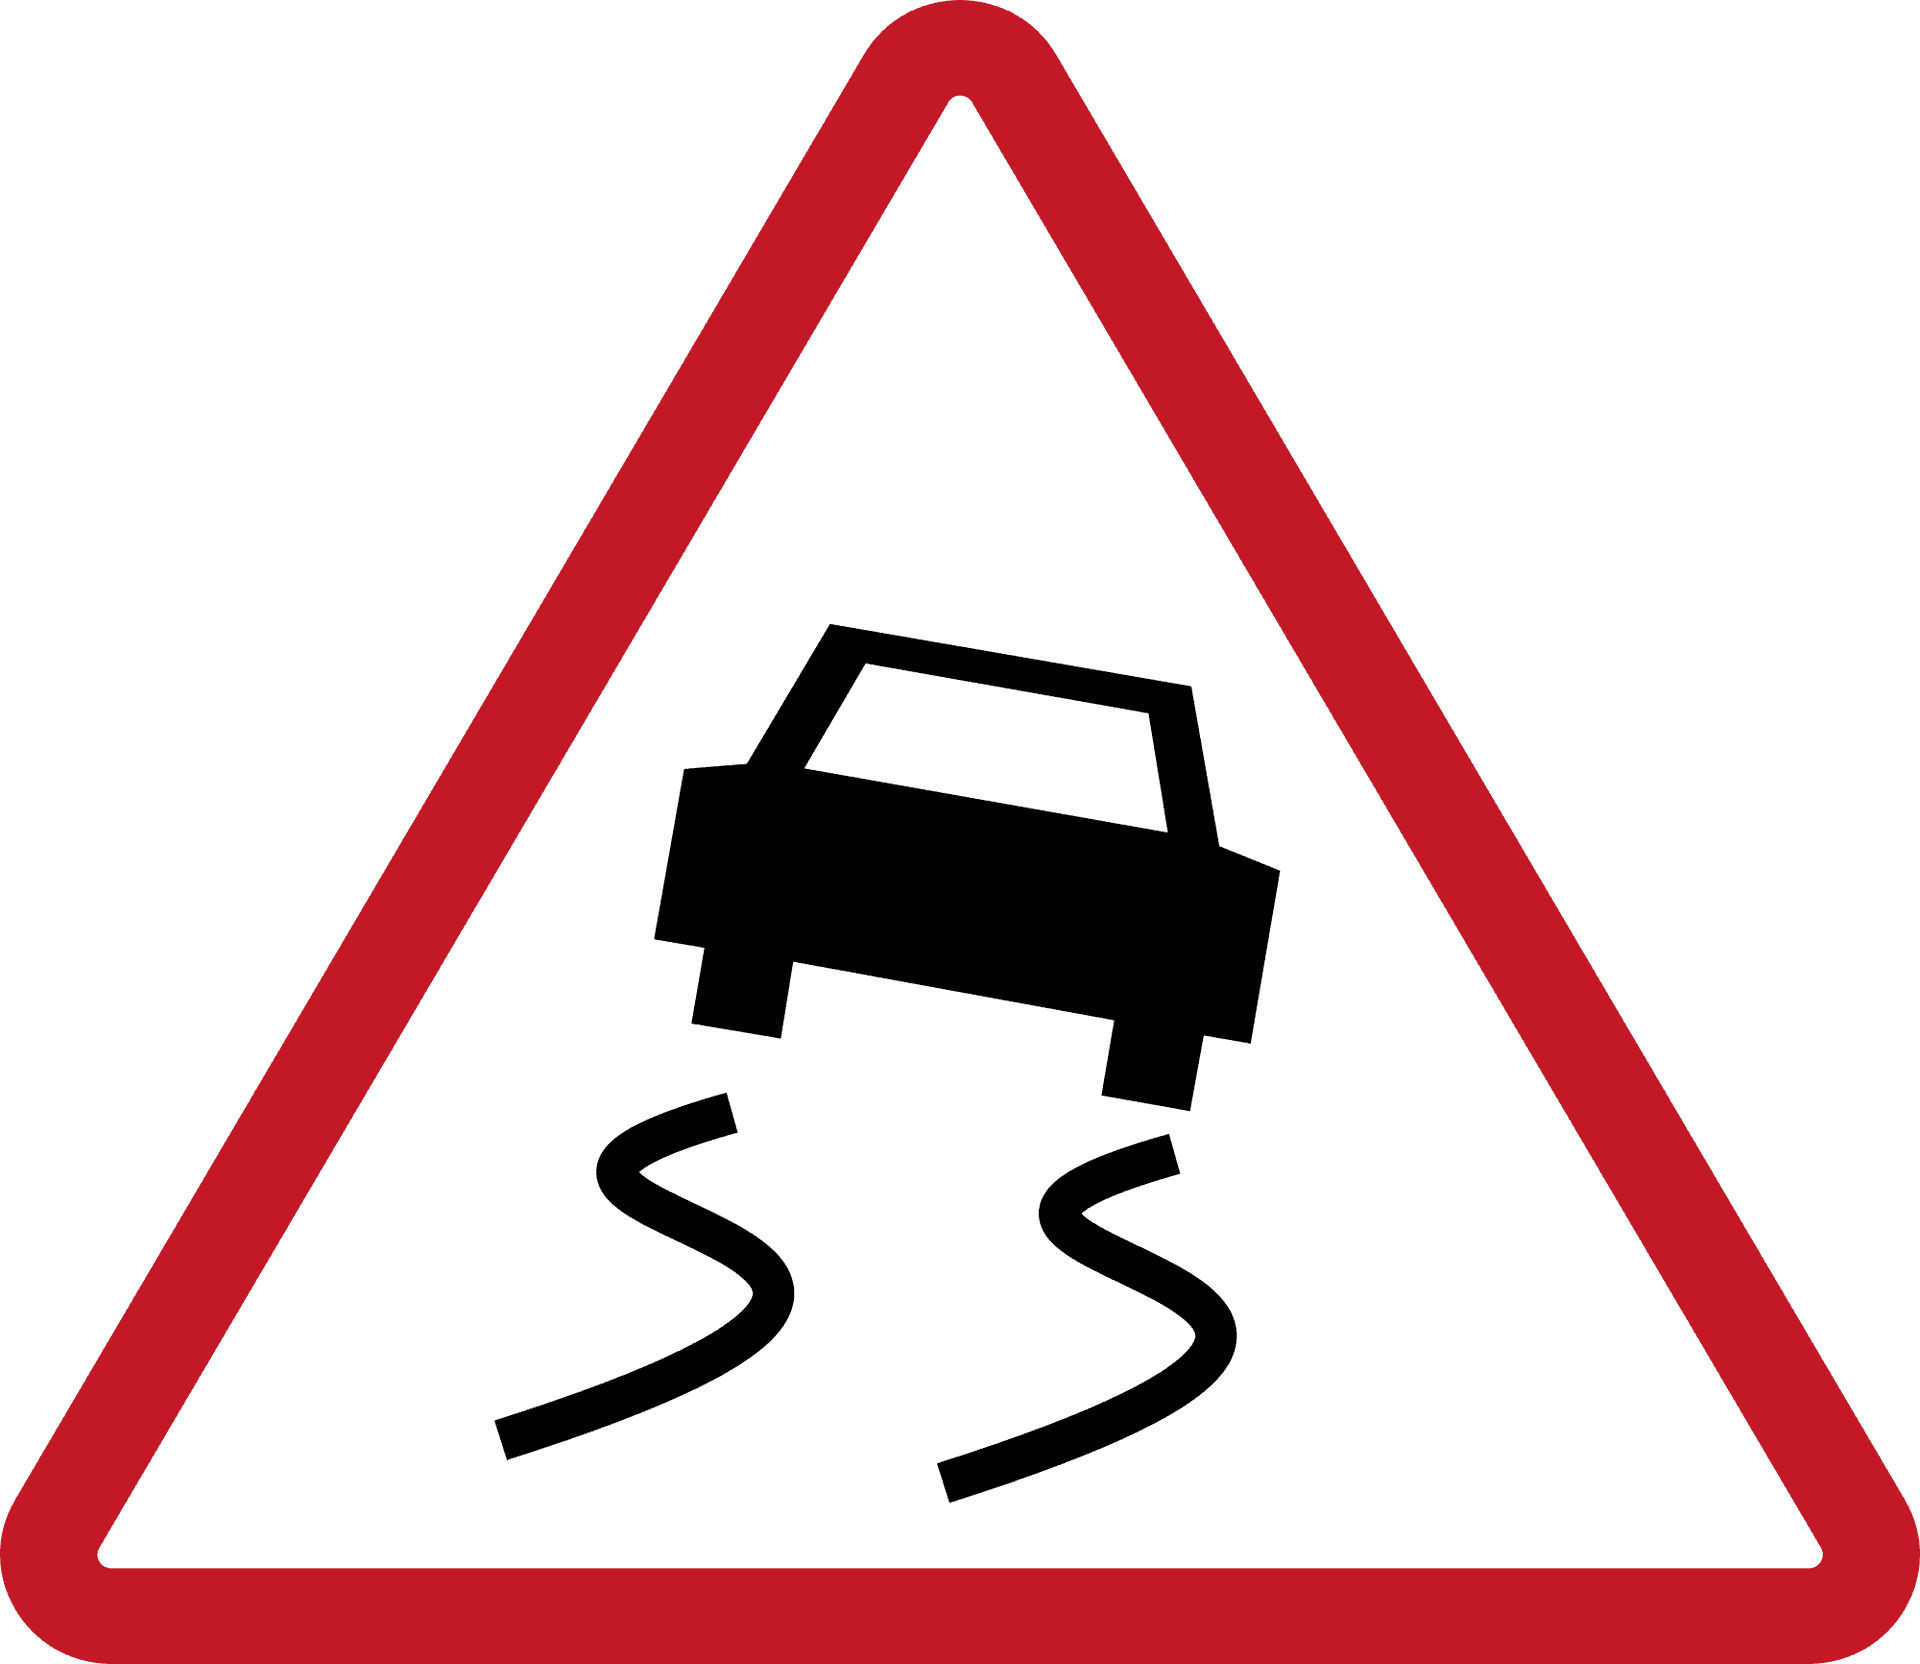 Slippery_ Road_ Warning_ Sign PNG image